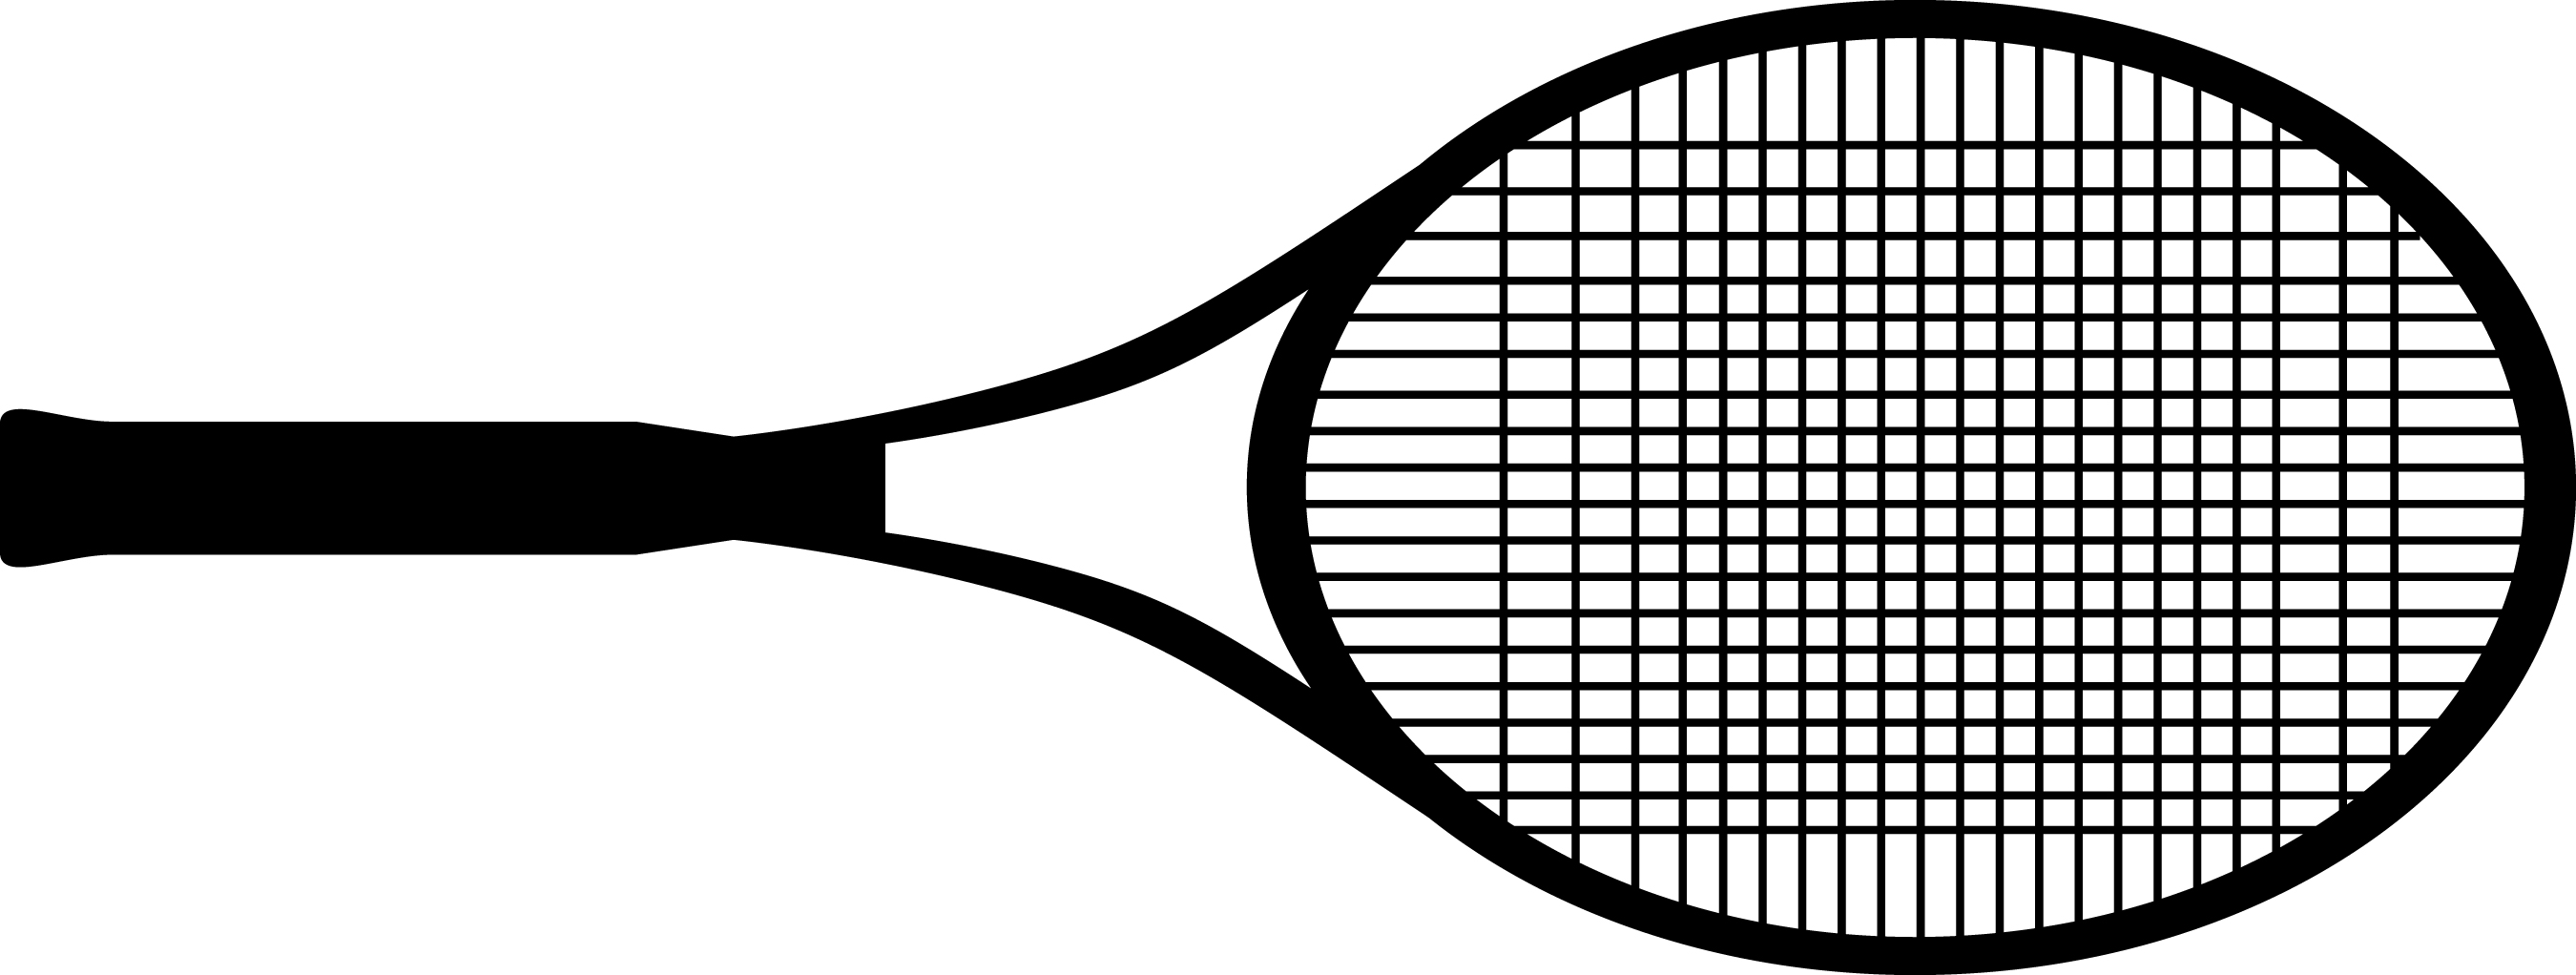 Tennis Racket Silhouette images pictures - NearPics. Pictures Of Tennis Rackets. head_tennis_racquet_microgel_. Tennis Racquet Clipart